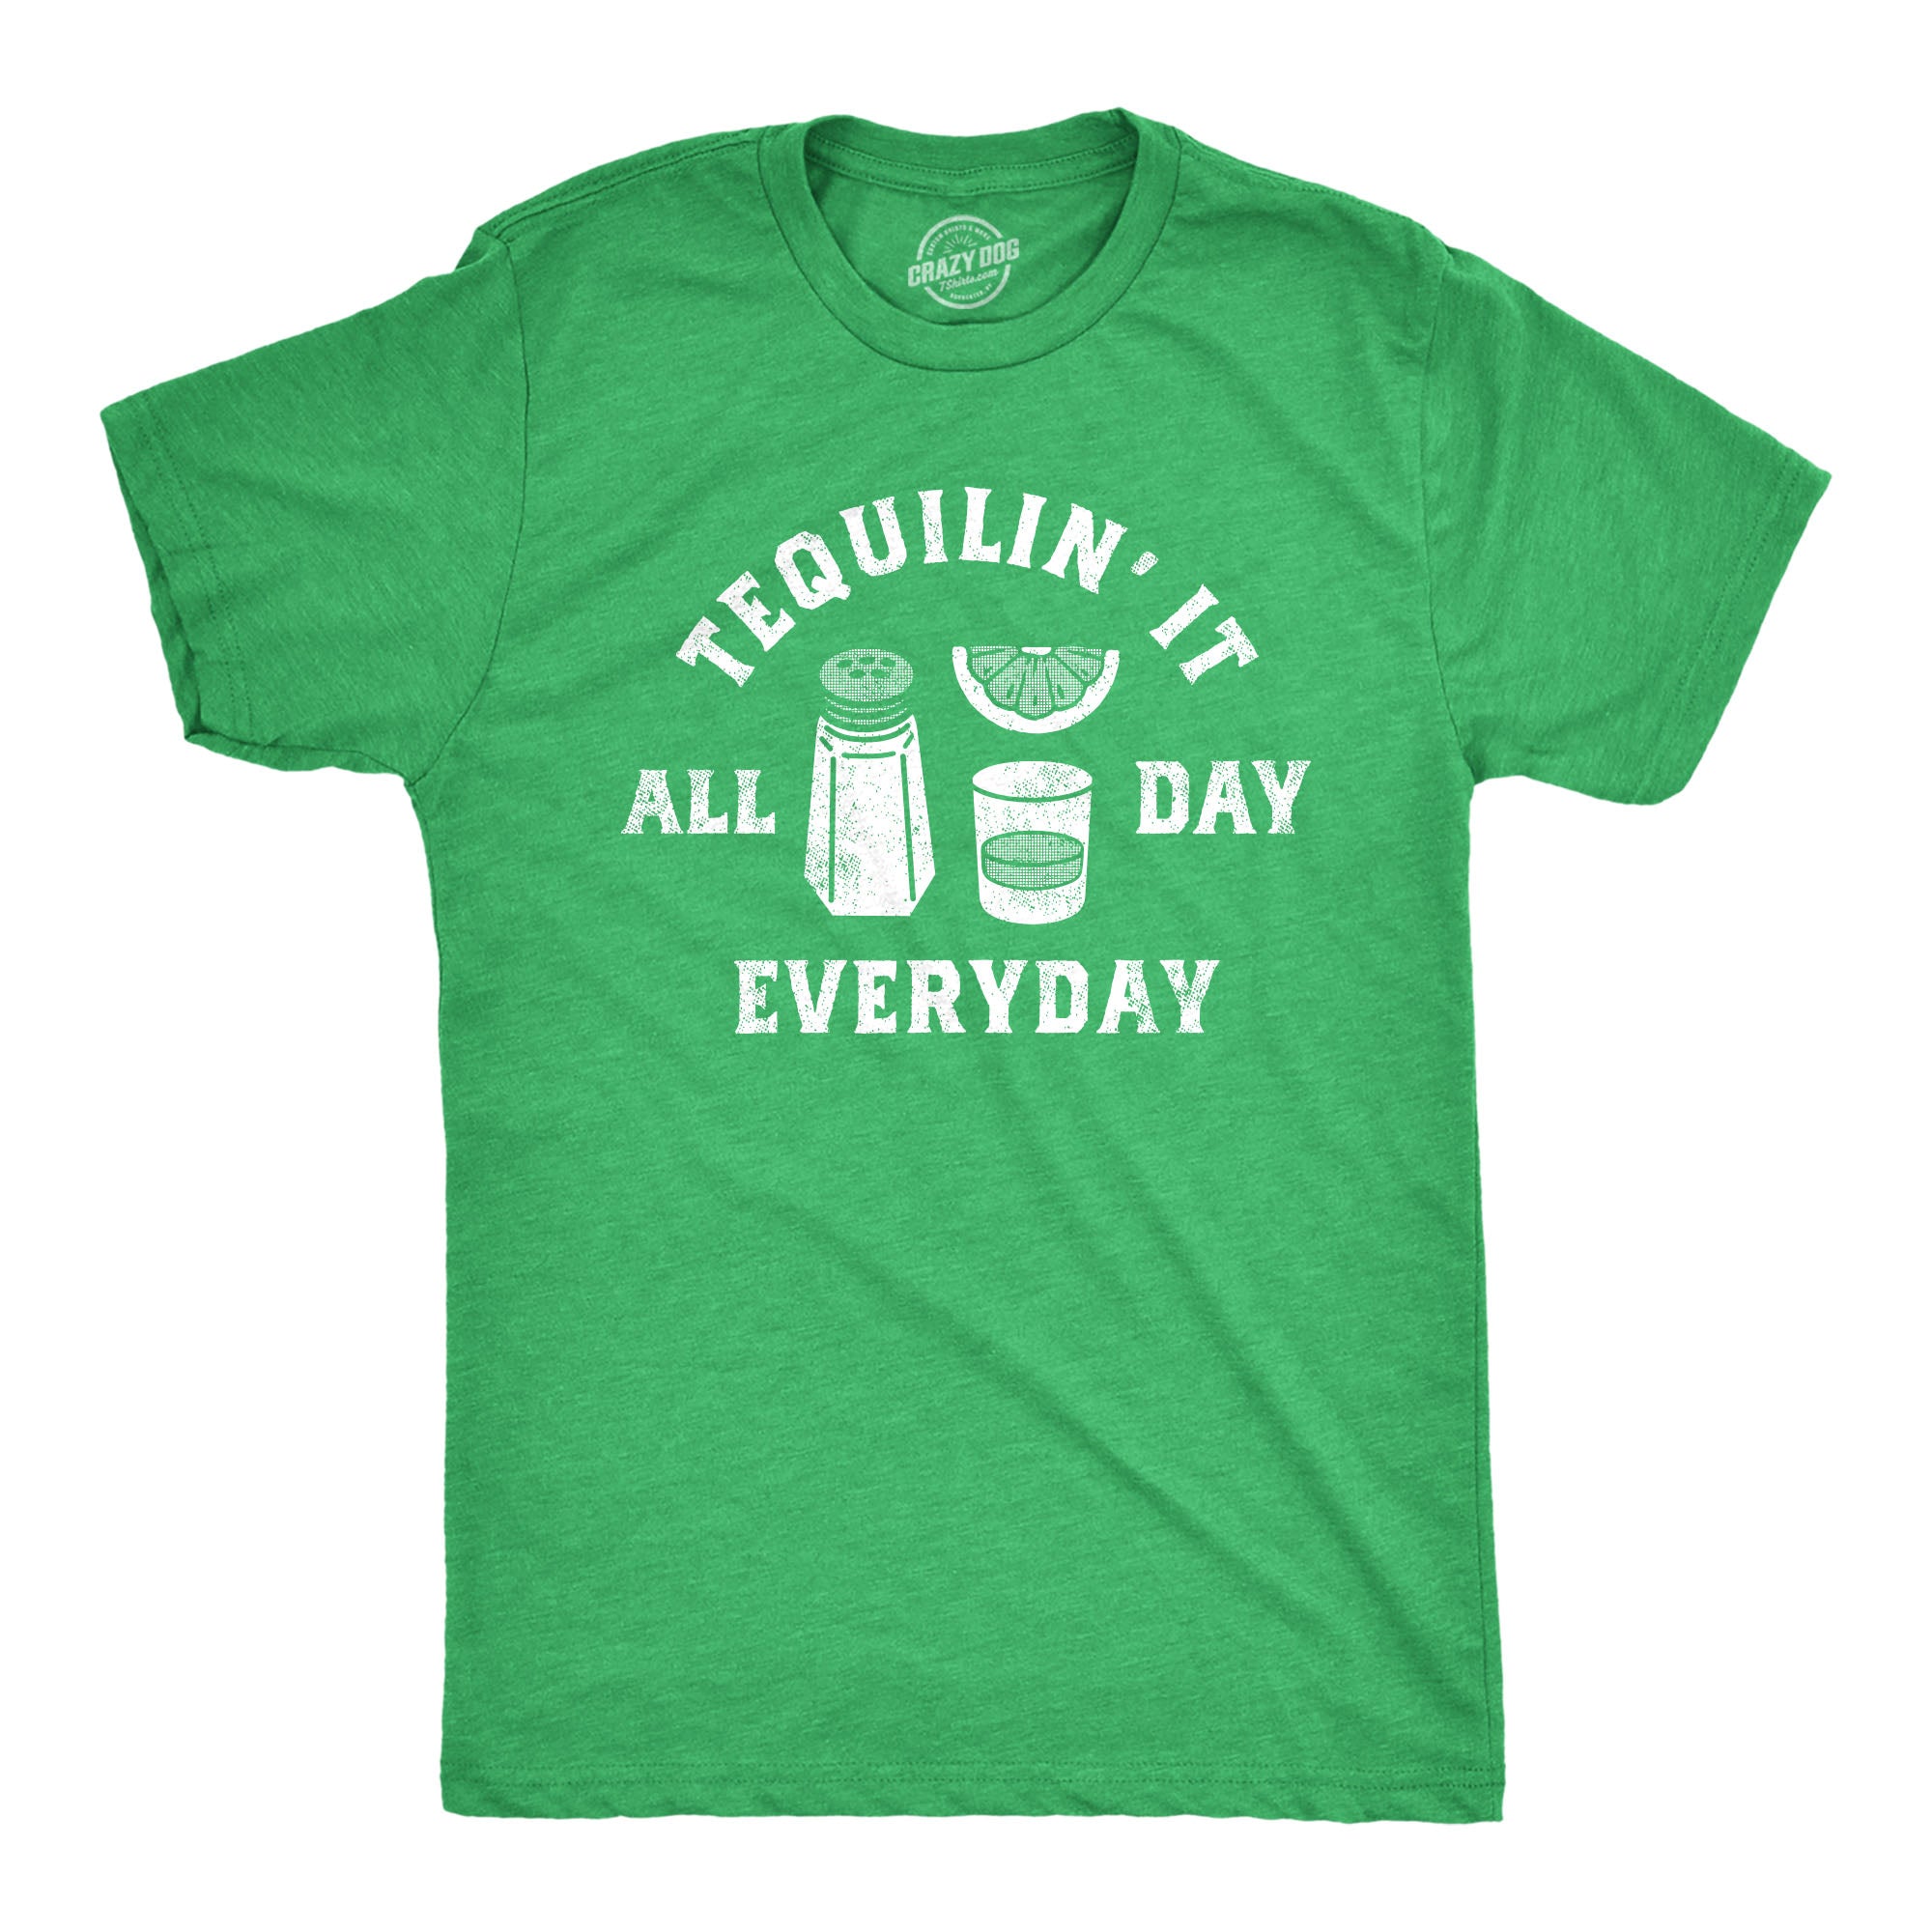 Funny Heather Green - TEQUILIN Tequilin It All Day Everyday Mens T Shirt Nerdy Drinking Liquor Tee